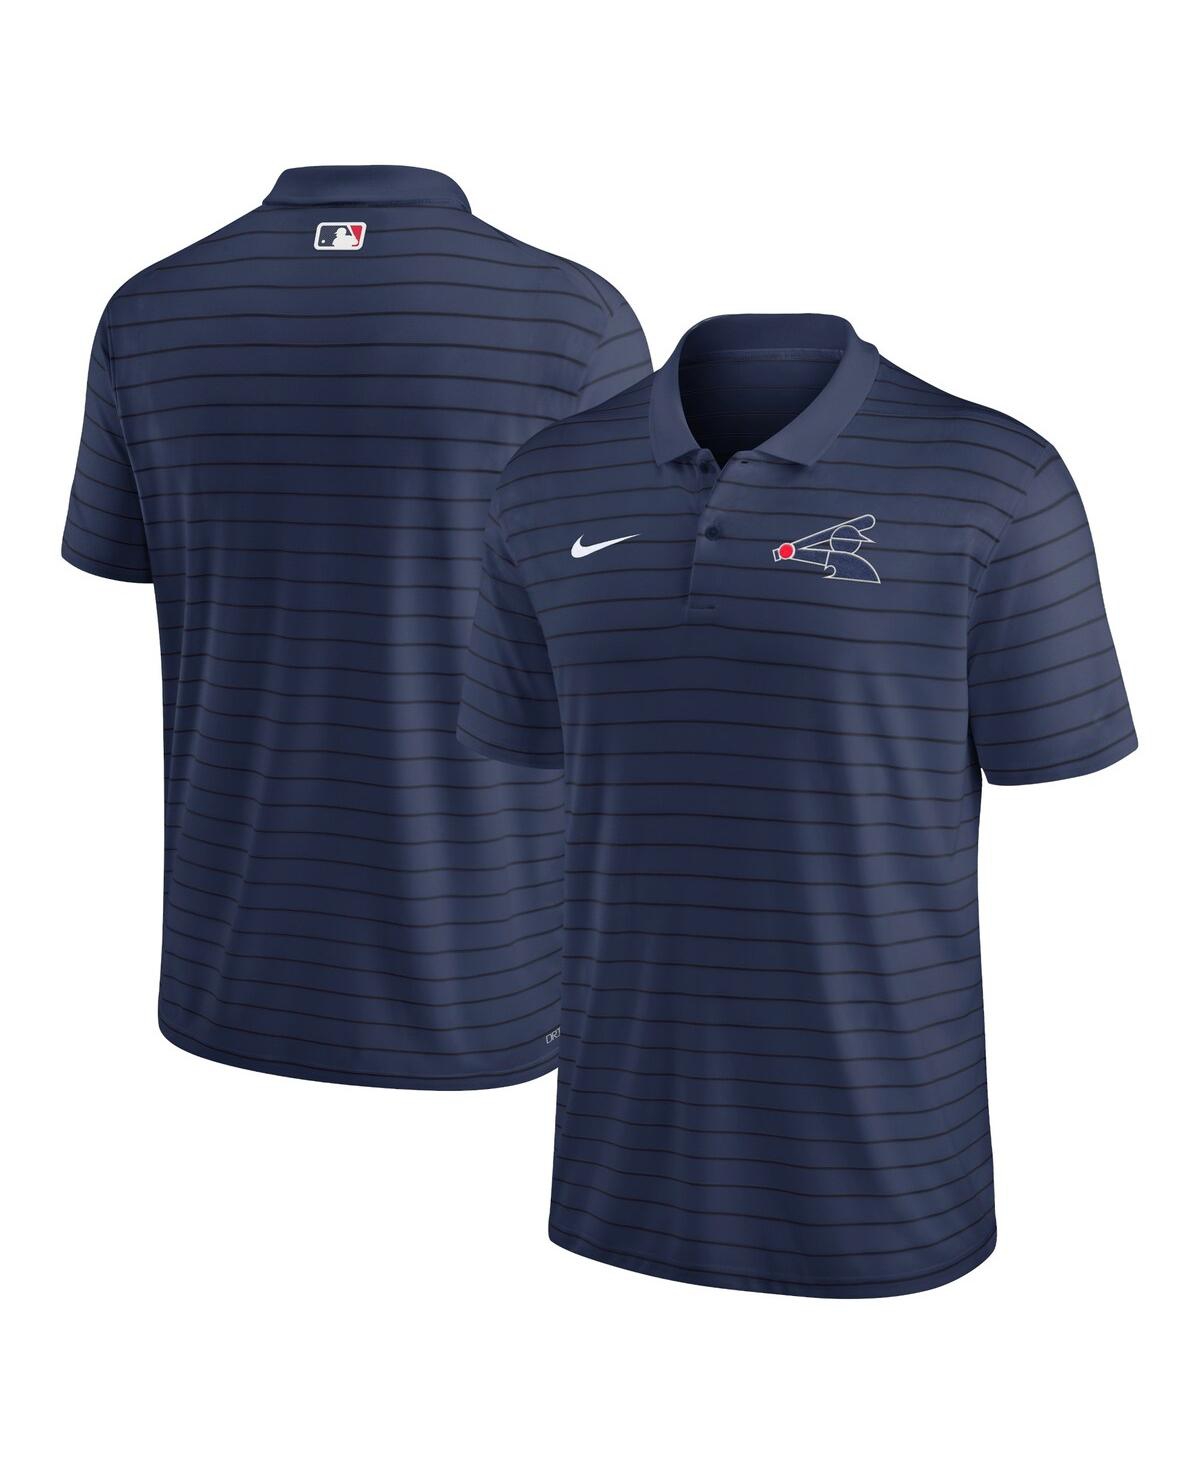 Men's Nike Navy Chicago White Sox Authentic Collection Victory Striped Performance Polo Shirt - Navy